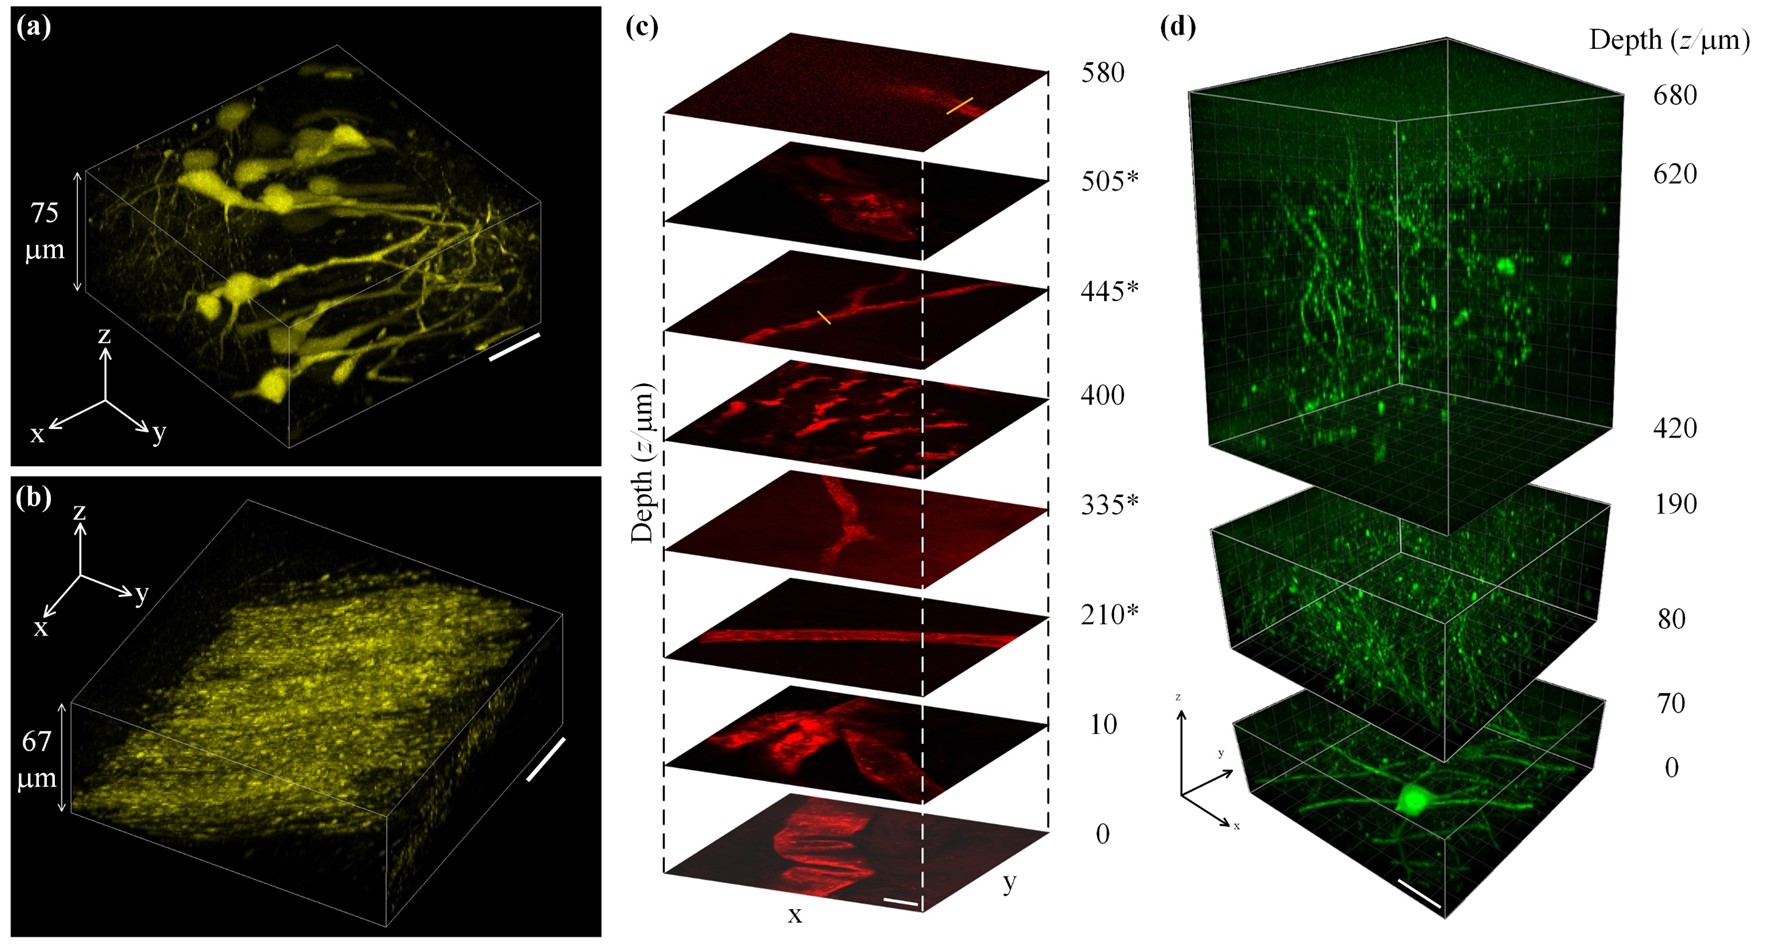 Two-photon imaging results, based on the novel 937-nm laser